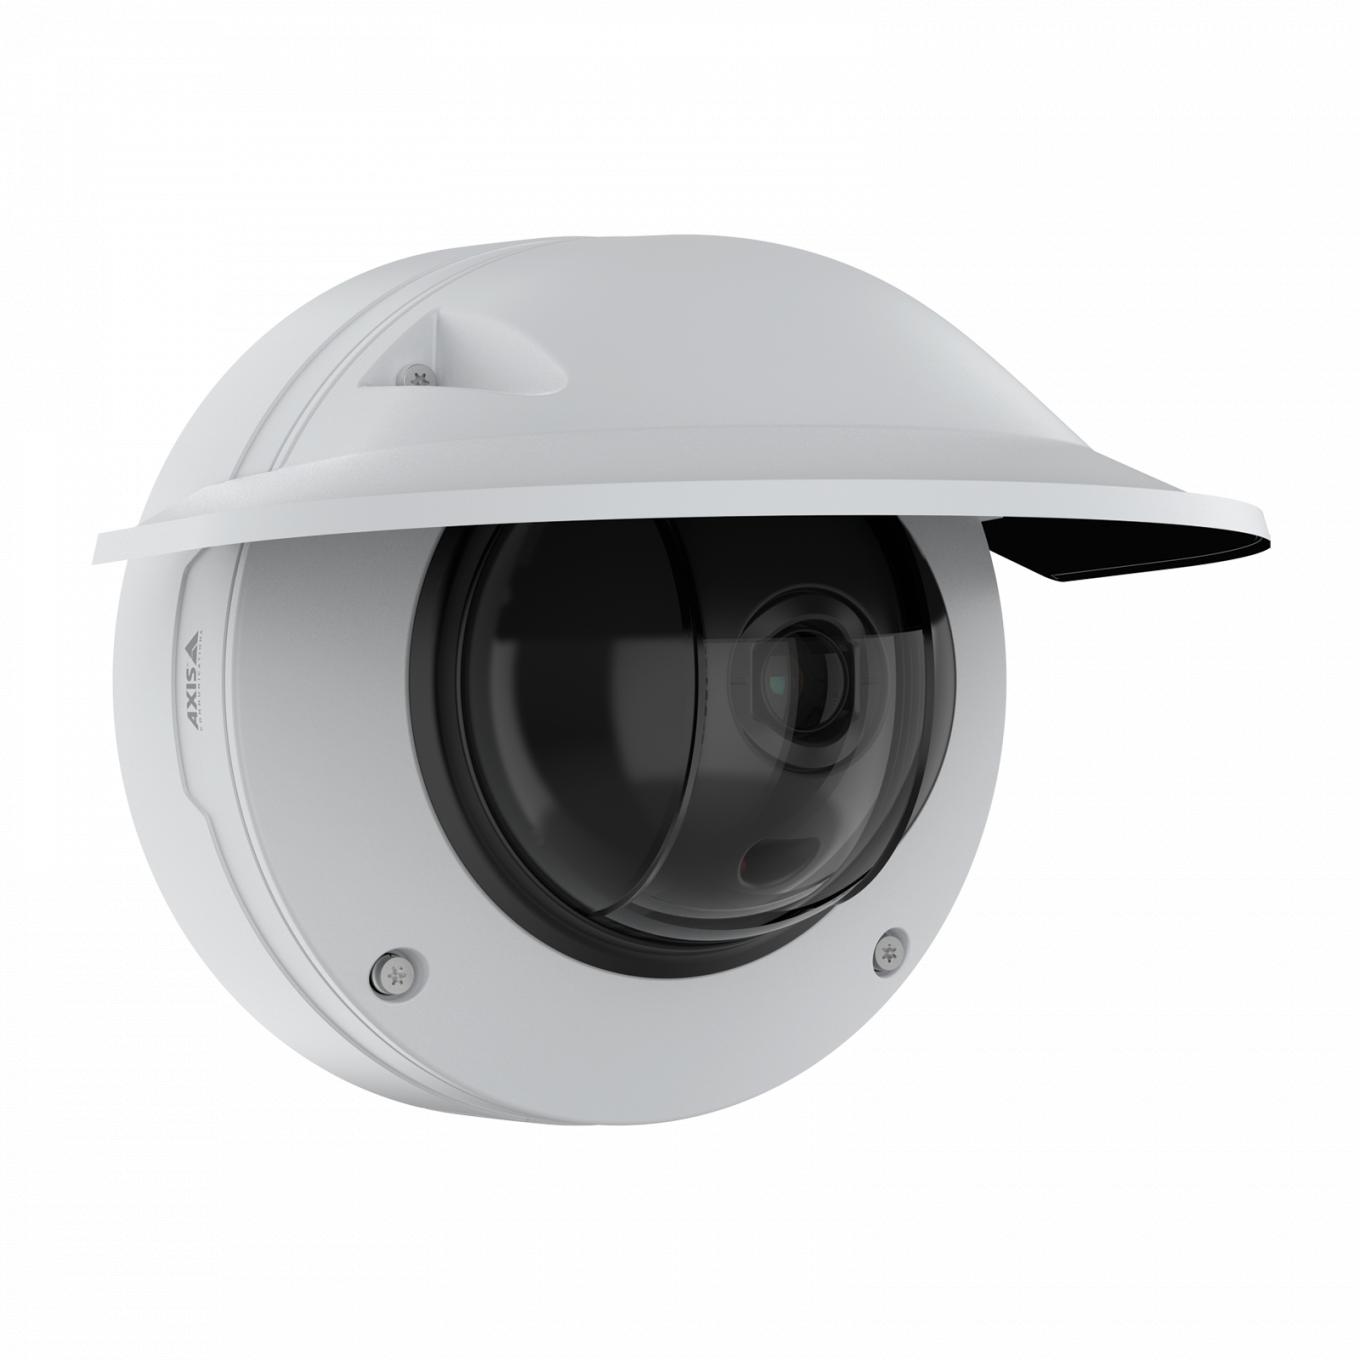 AXIS Q3536-LVE Dome Camera with weathershield, viewed from its right angle